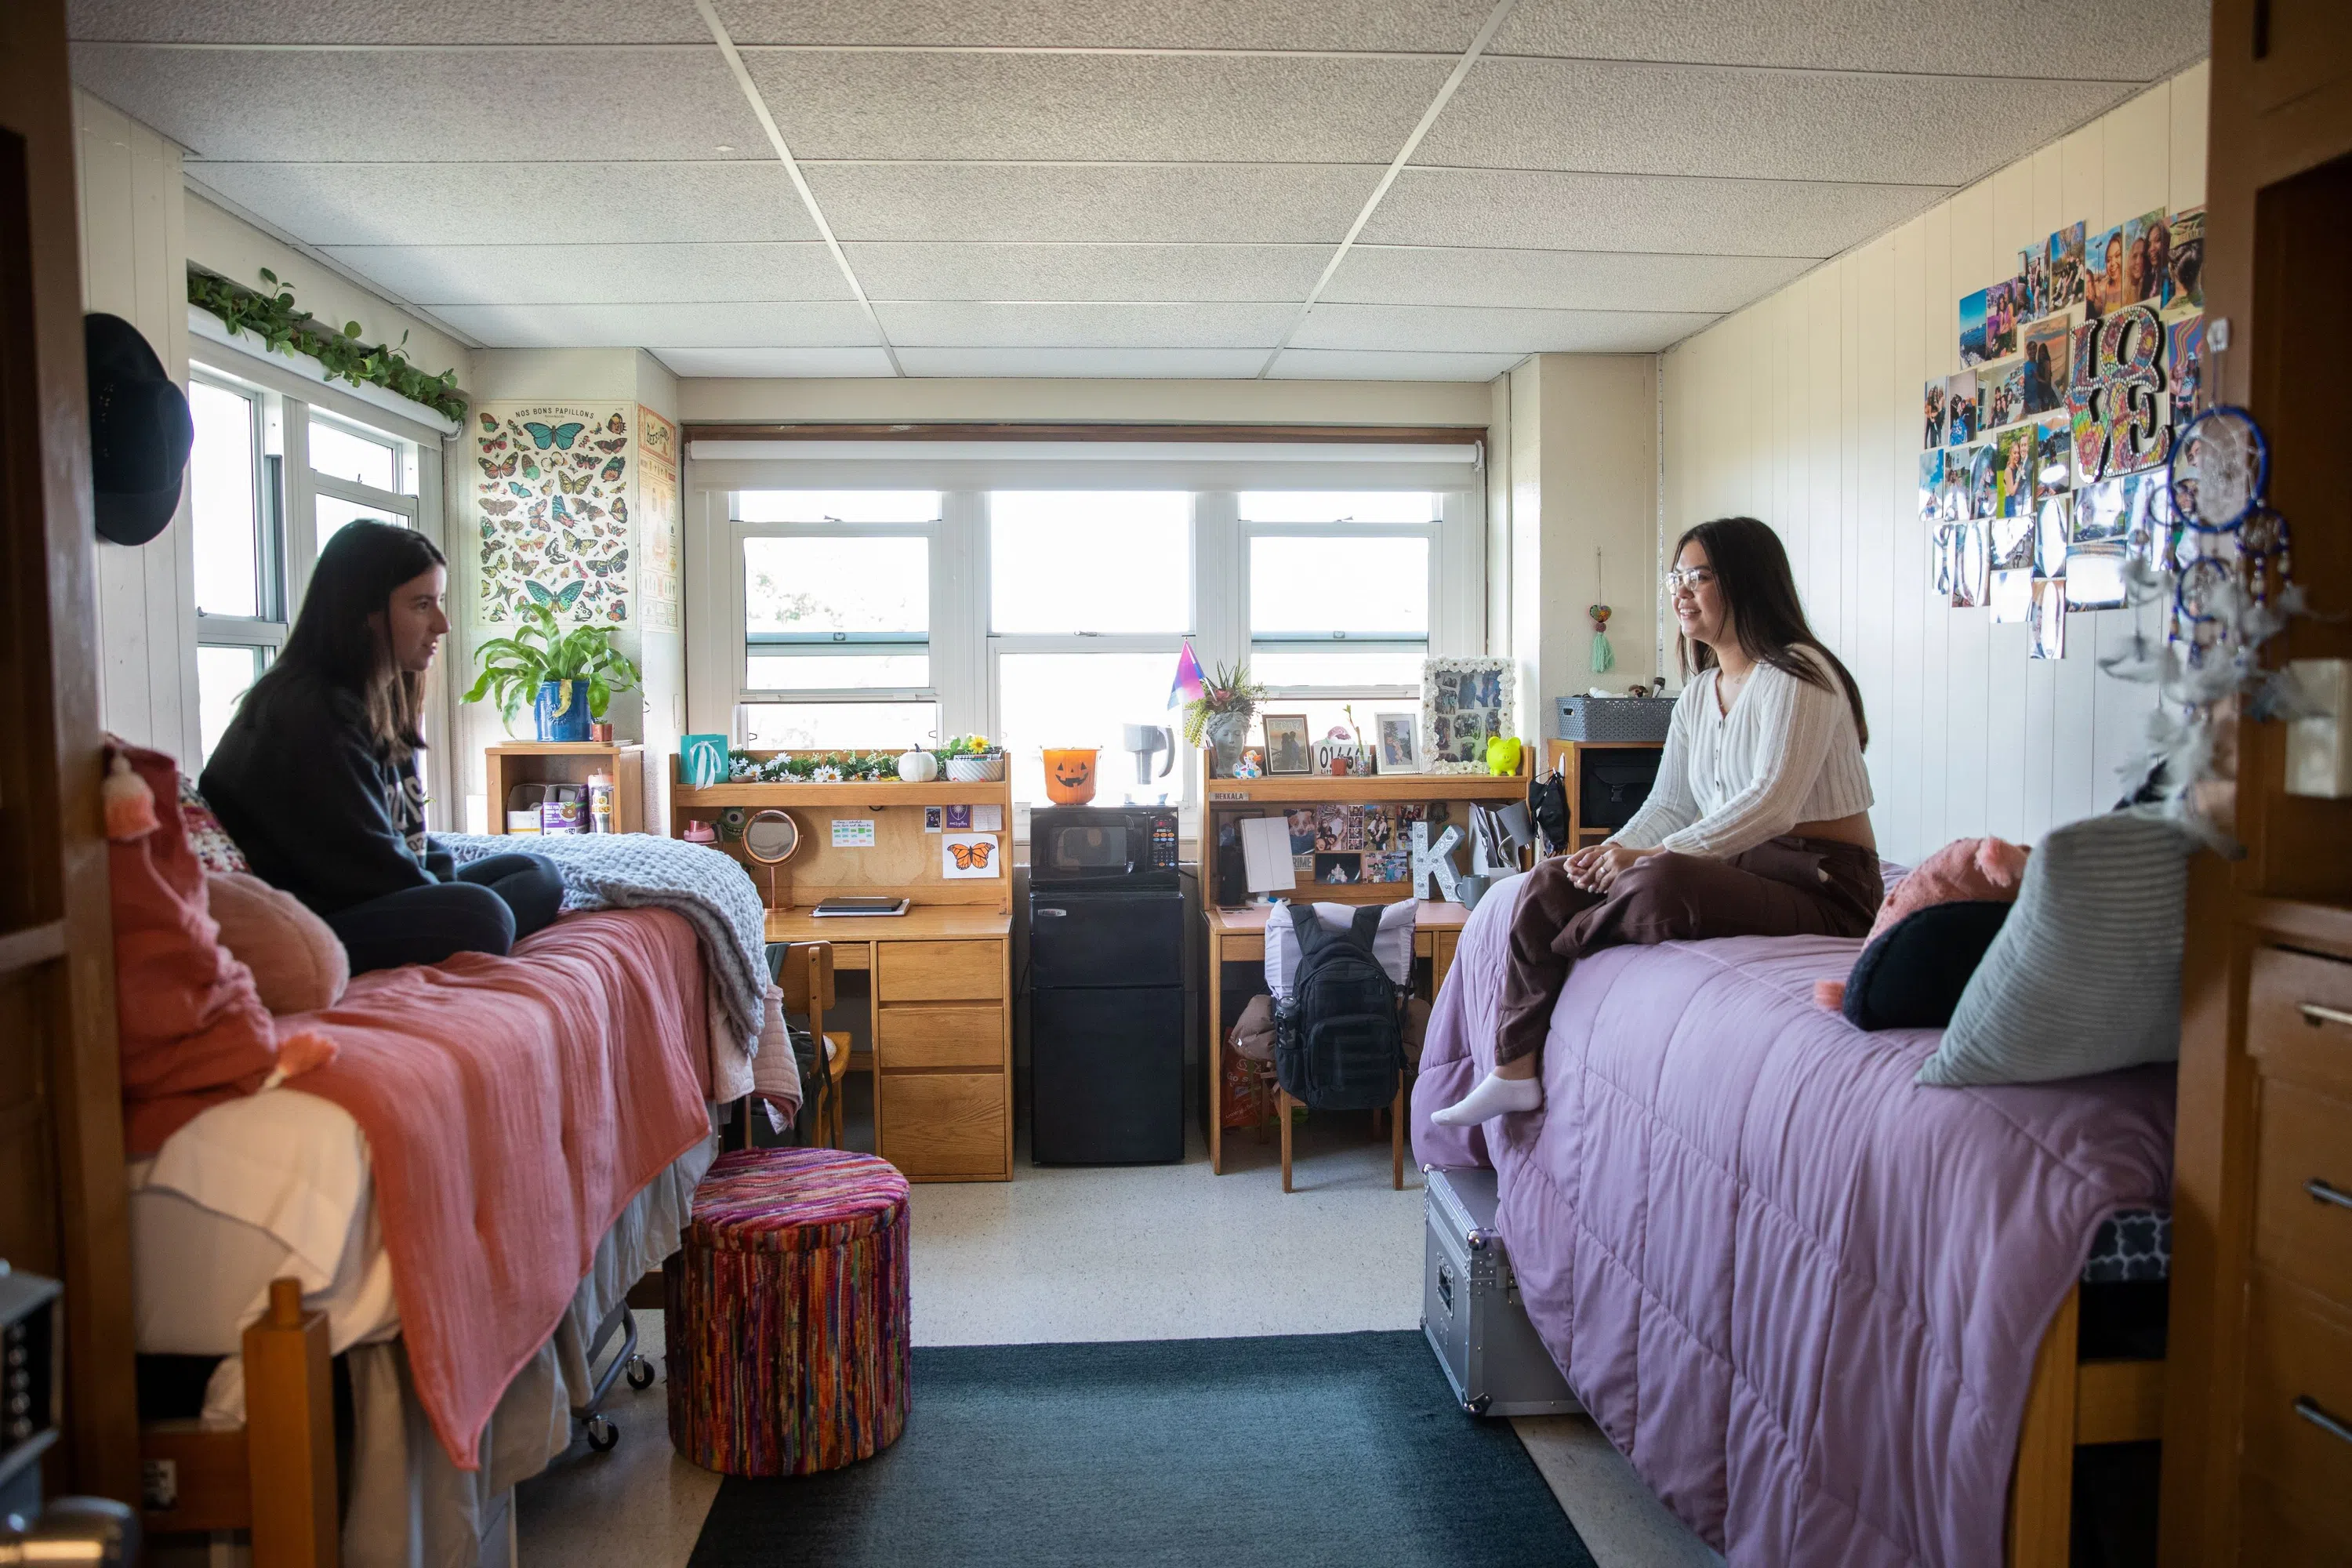 The inside of a dorm room is pictured with students present.